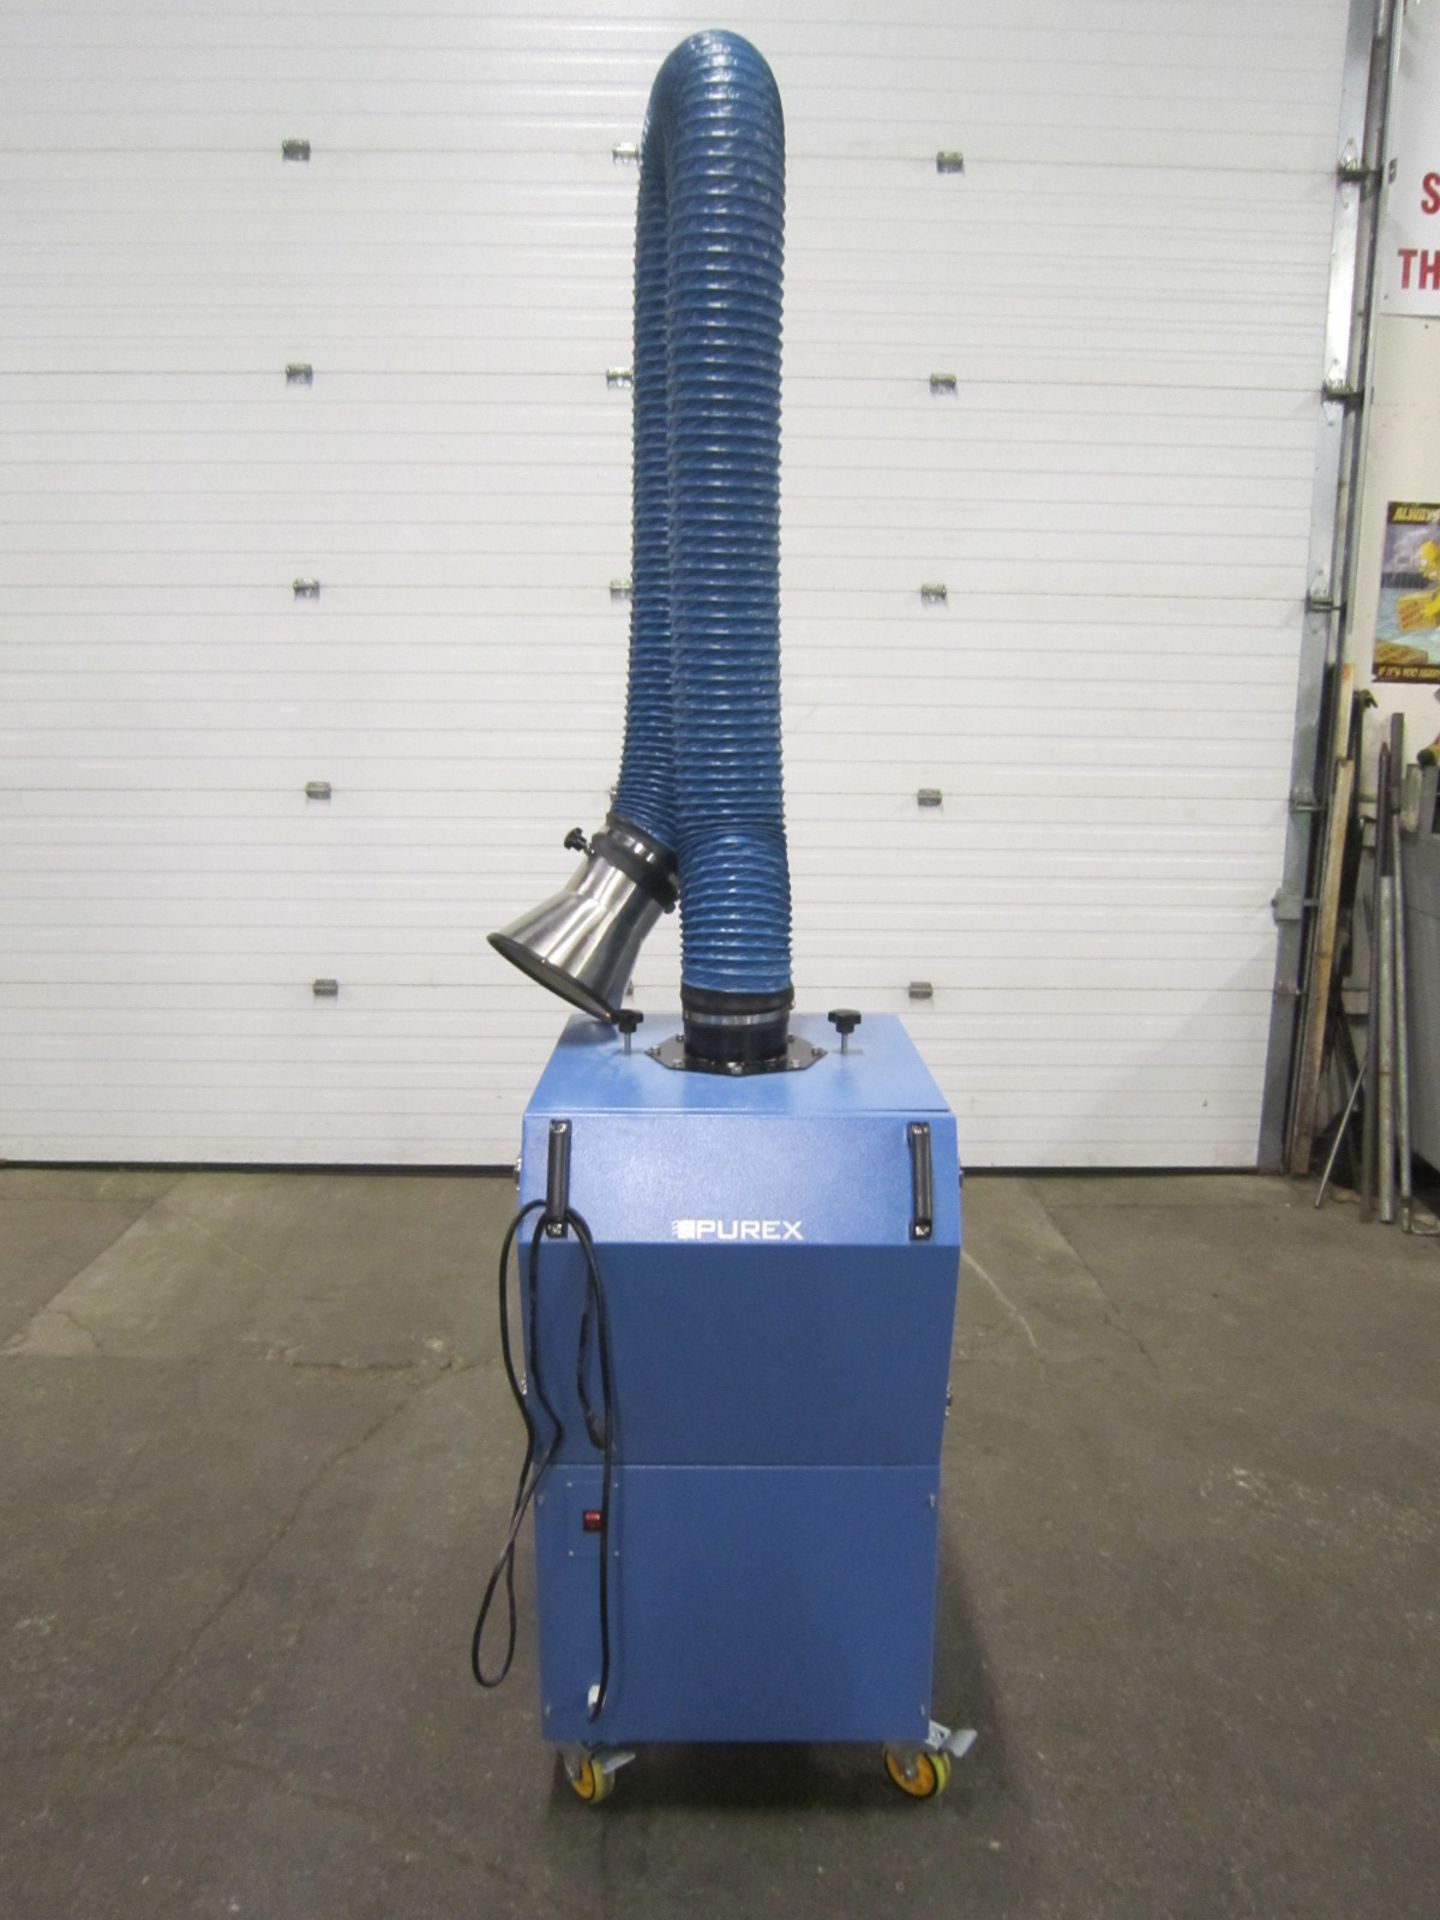 Purex Fume Extractor with long reach snorkel arm - 120V single phase - MINT & UNUSED - CLEAN FILTER